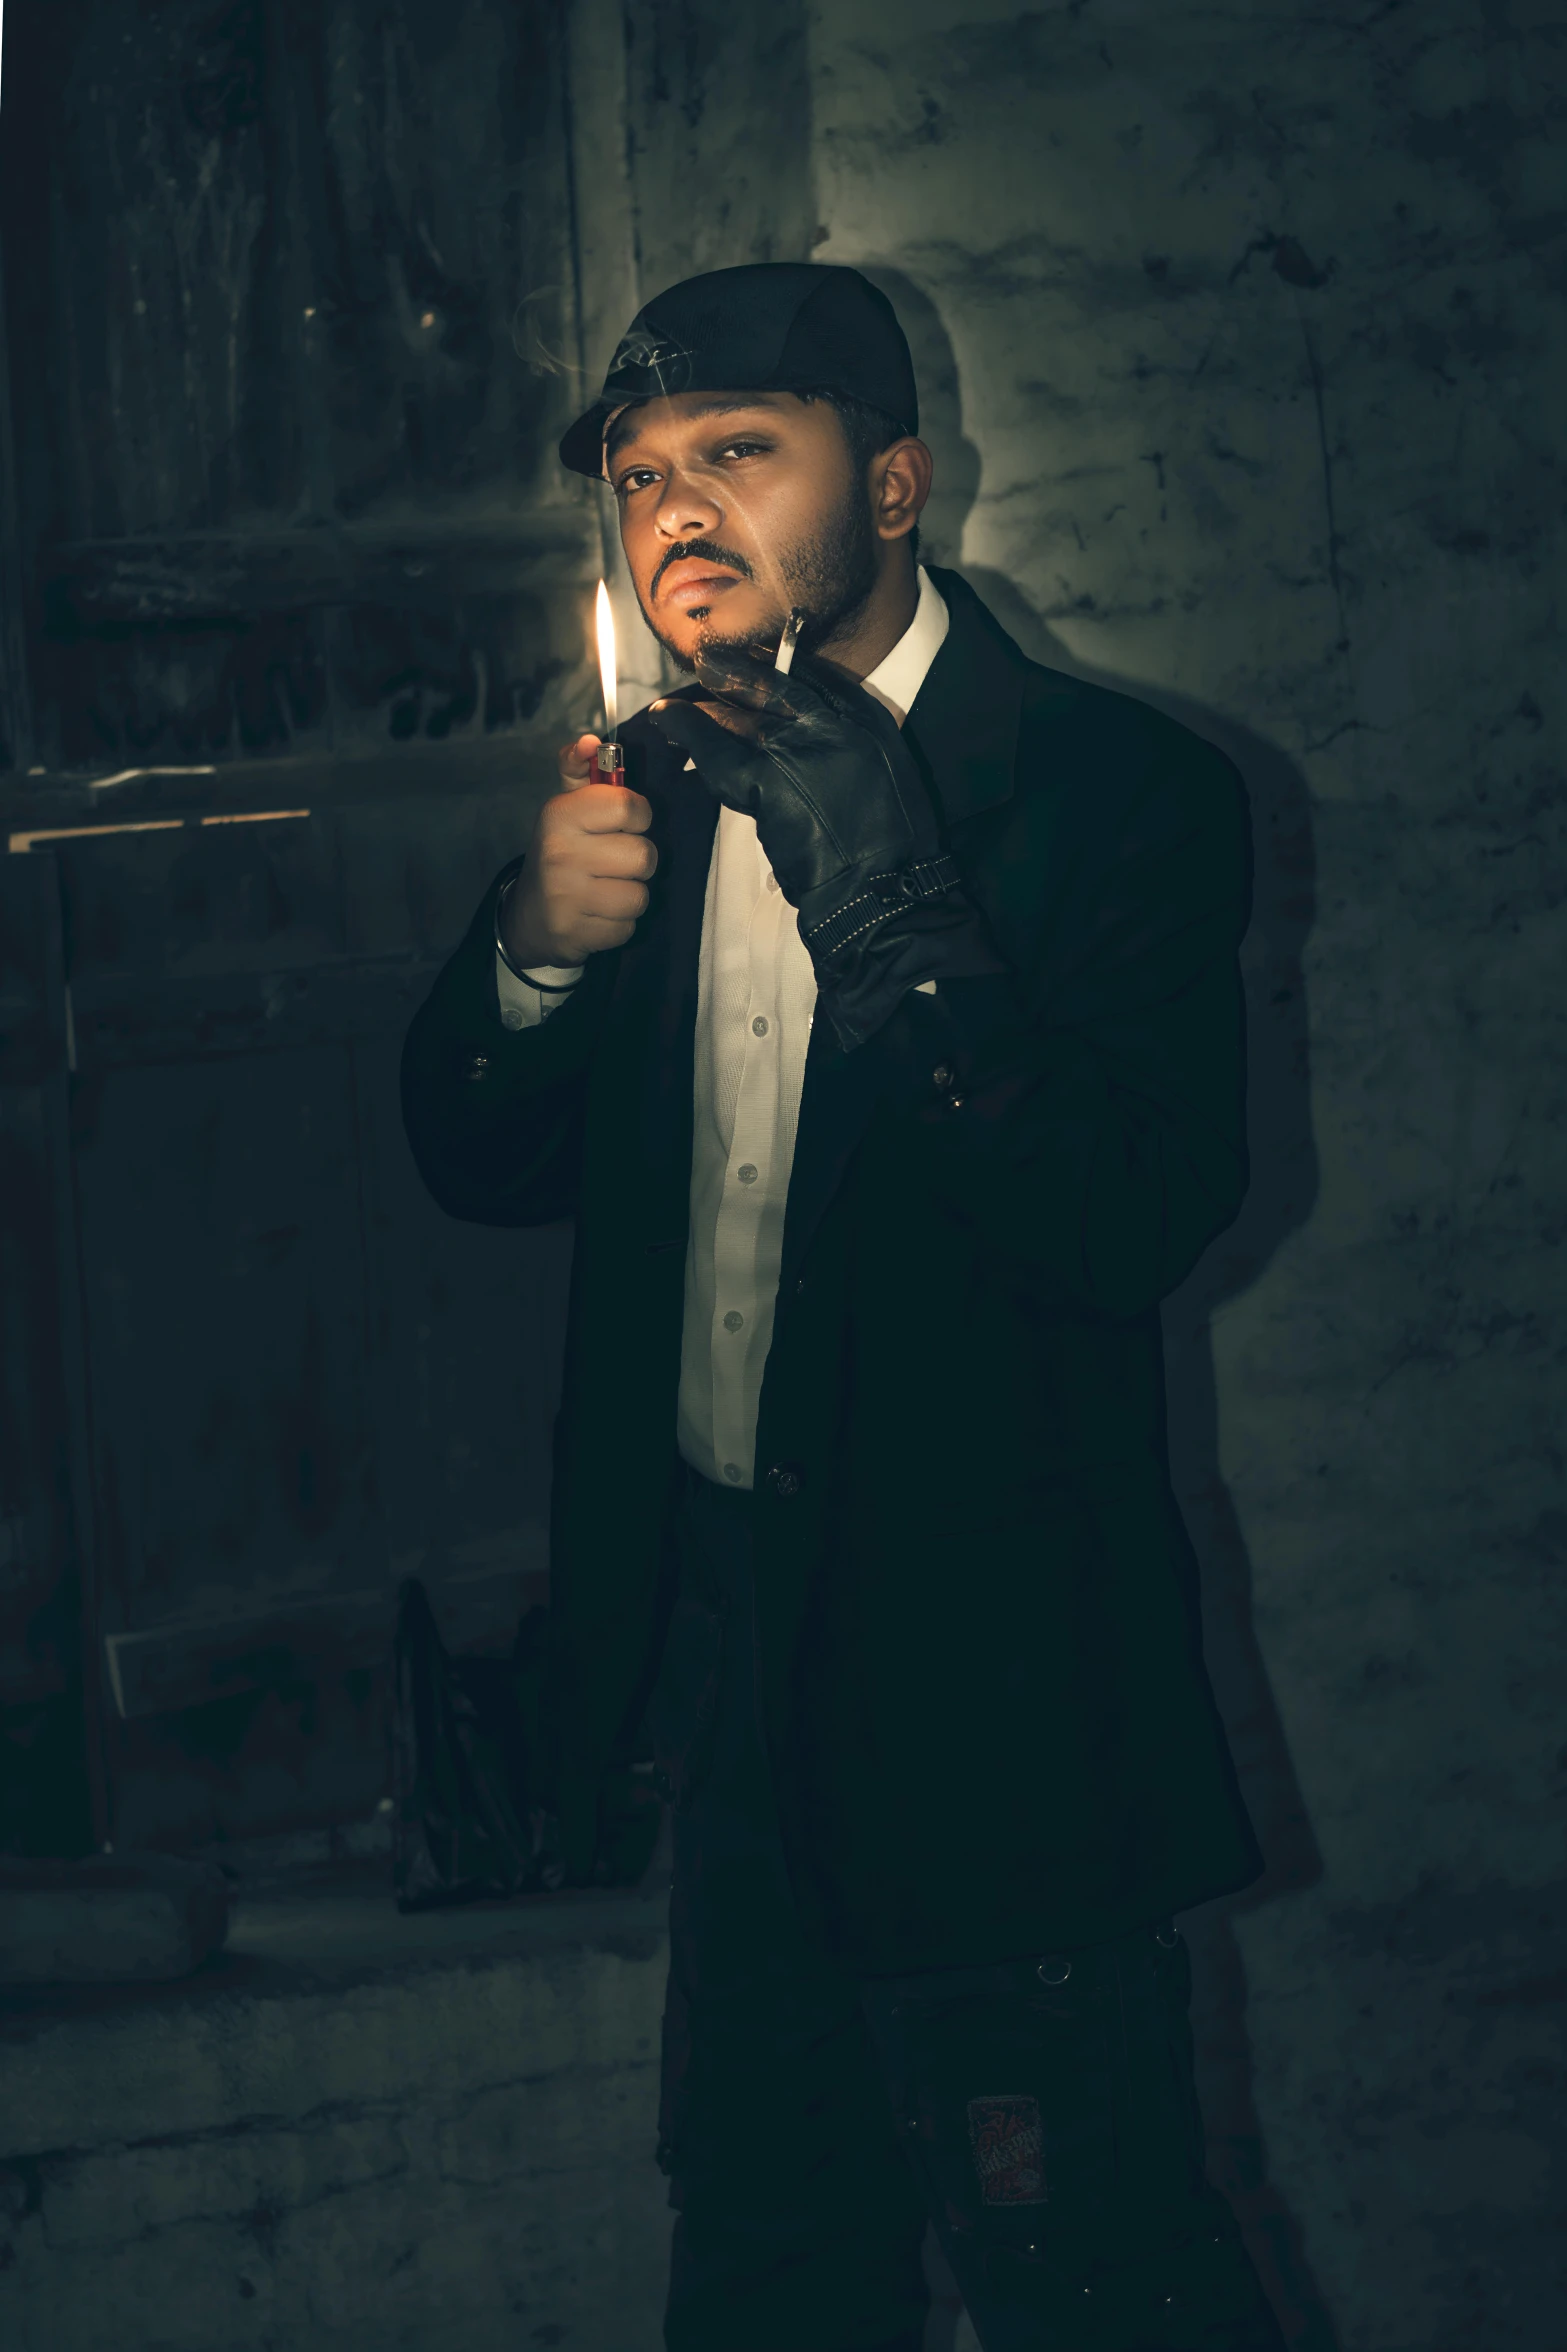 a man smoking a cigarette with a black top hat